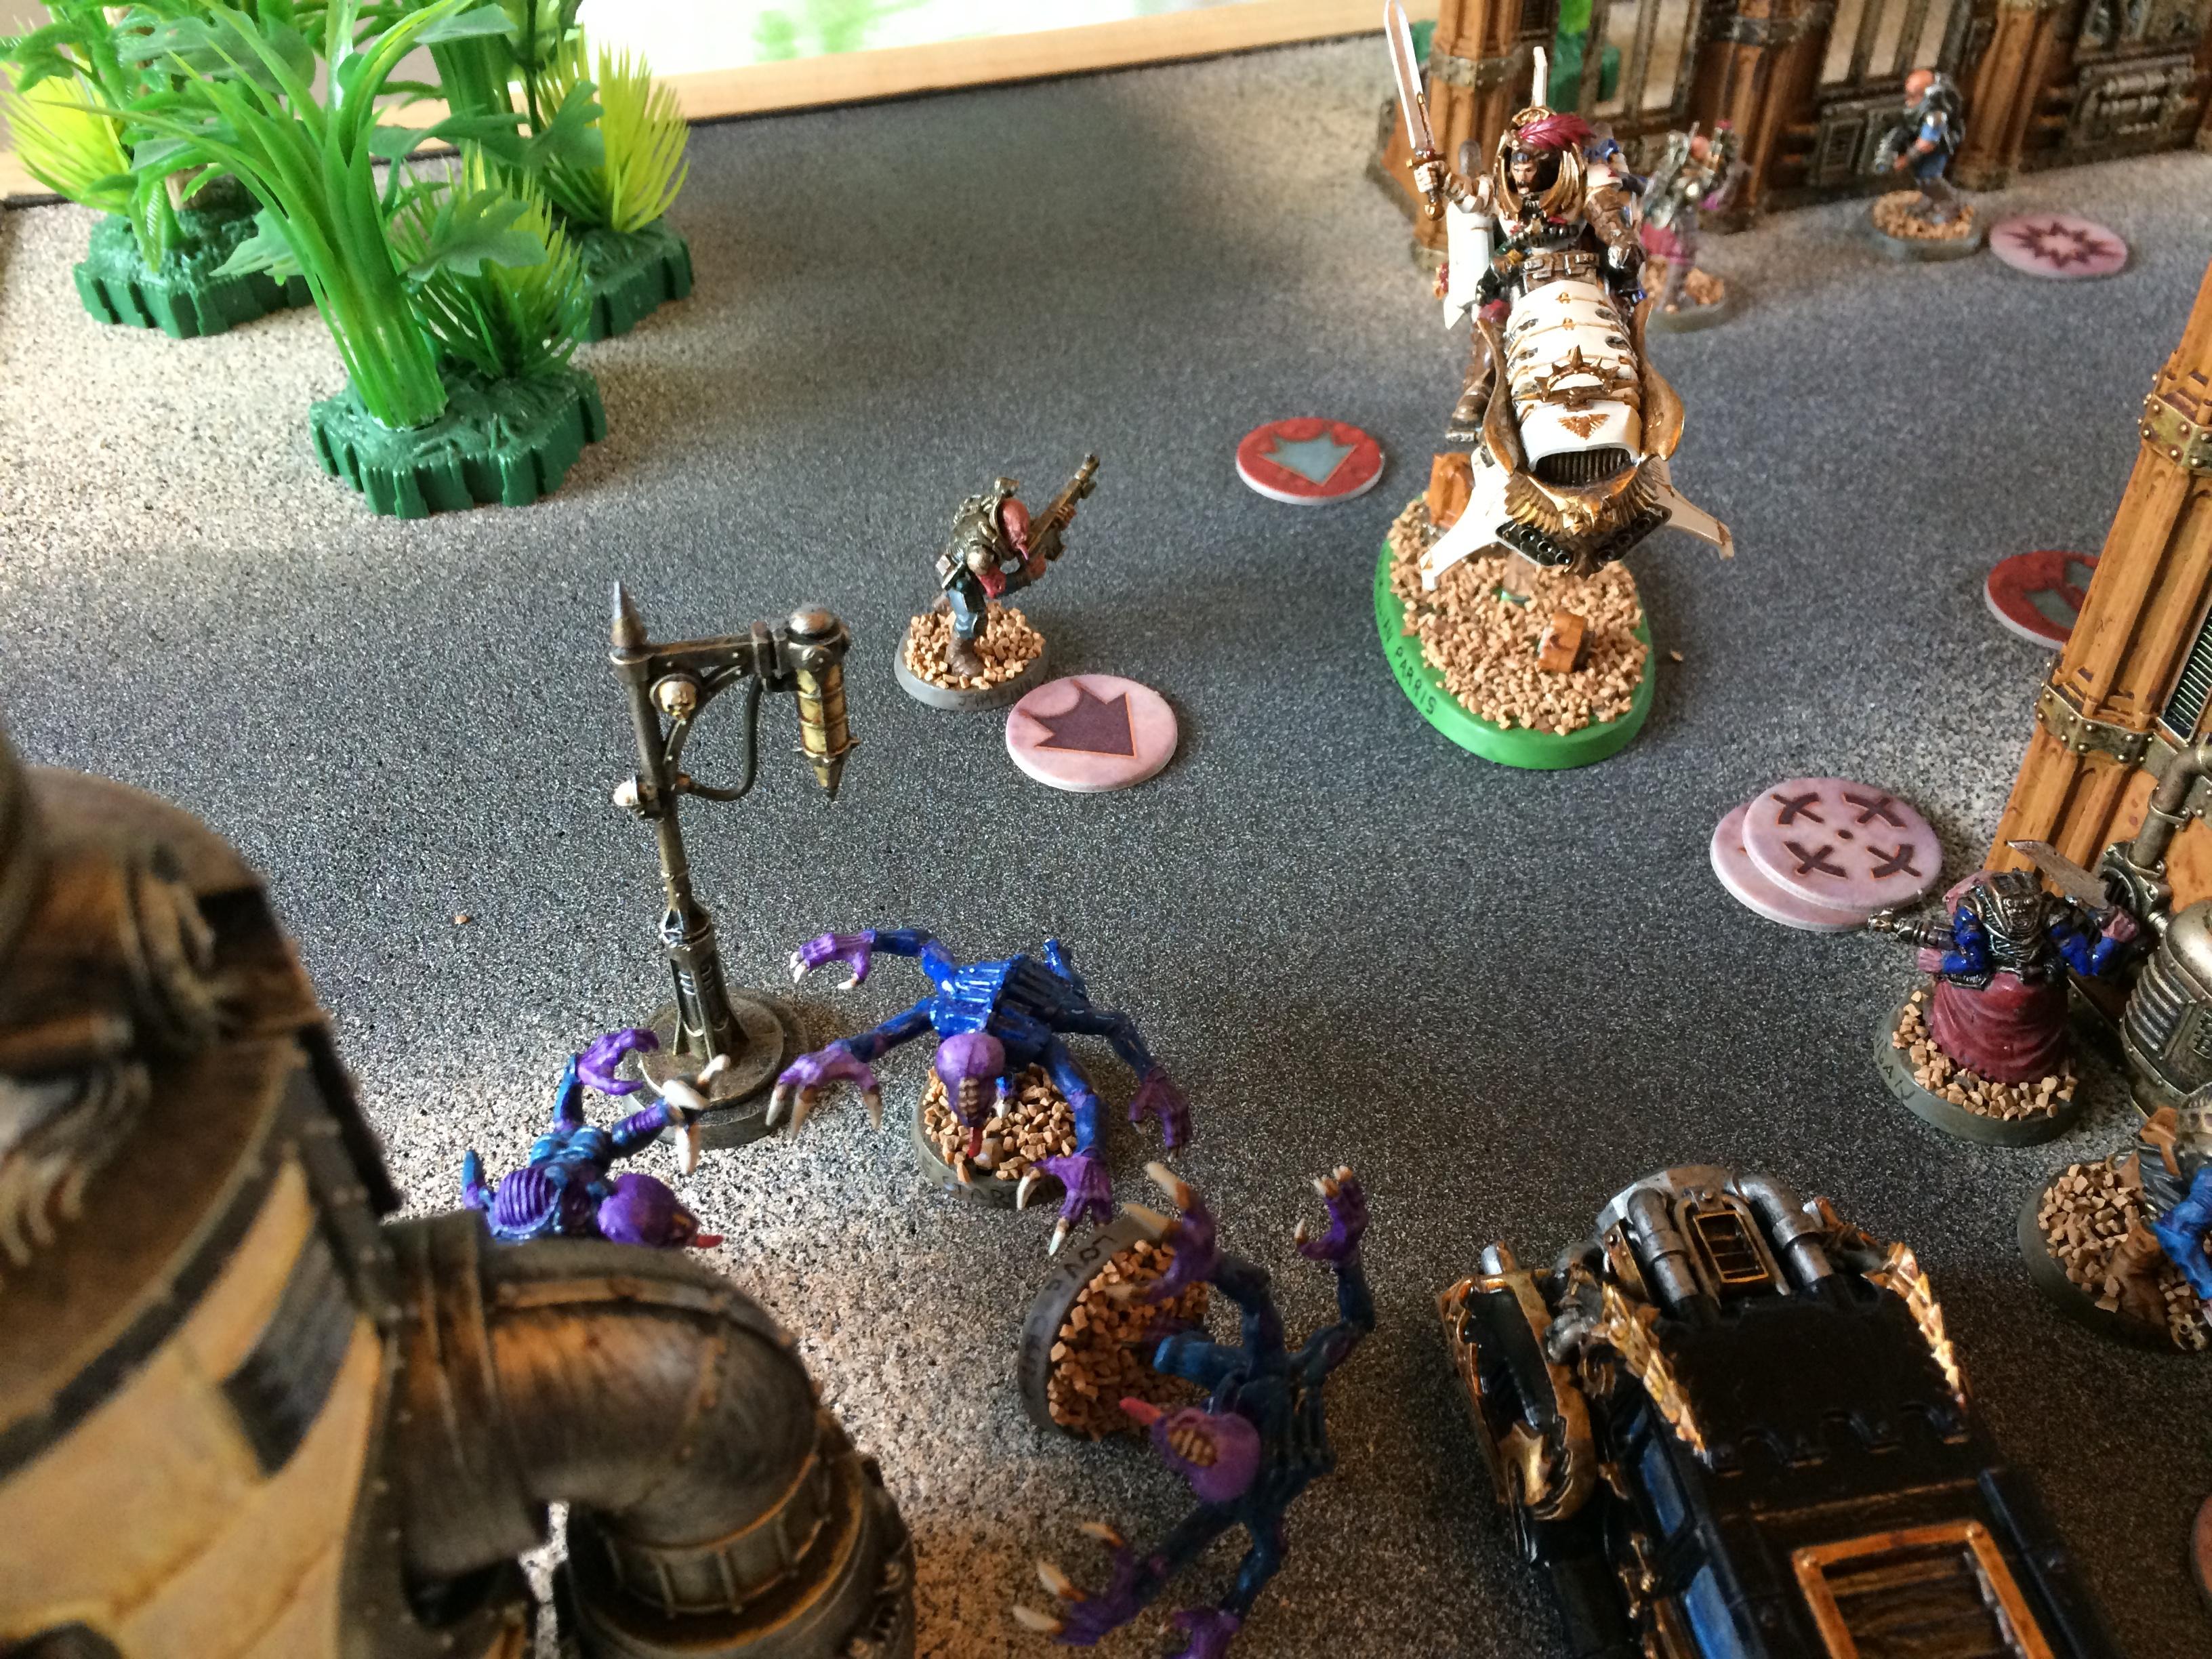 Inquisitor Parris fires upon the purestrains